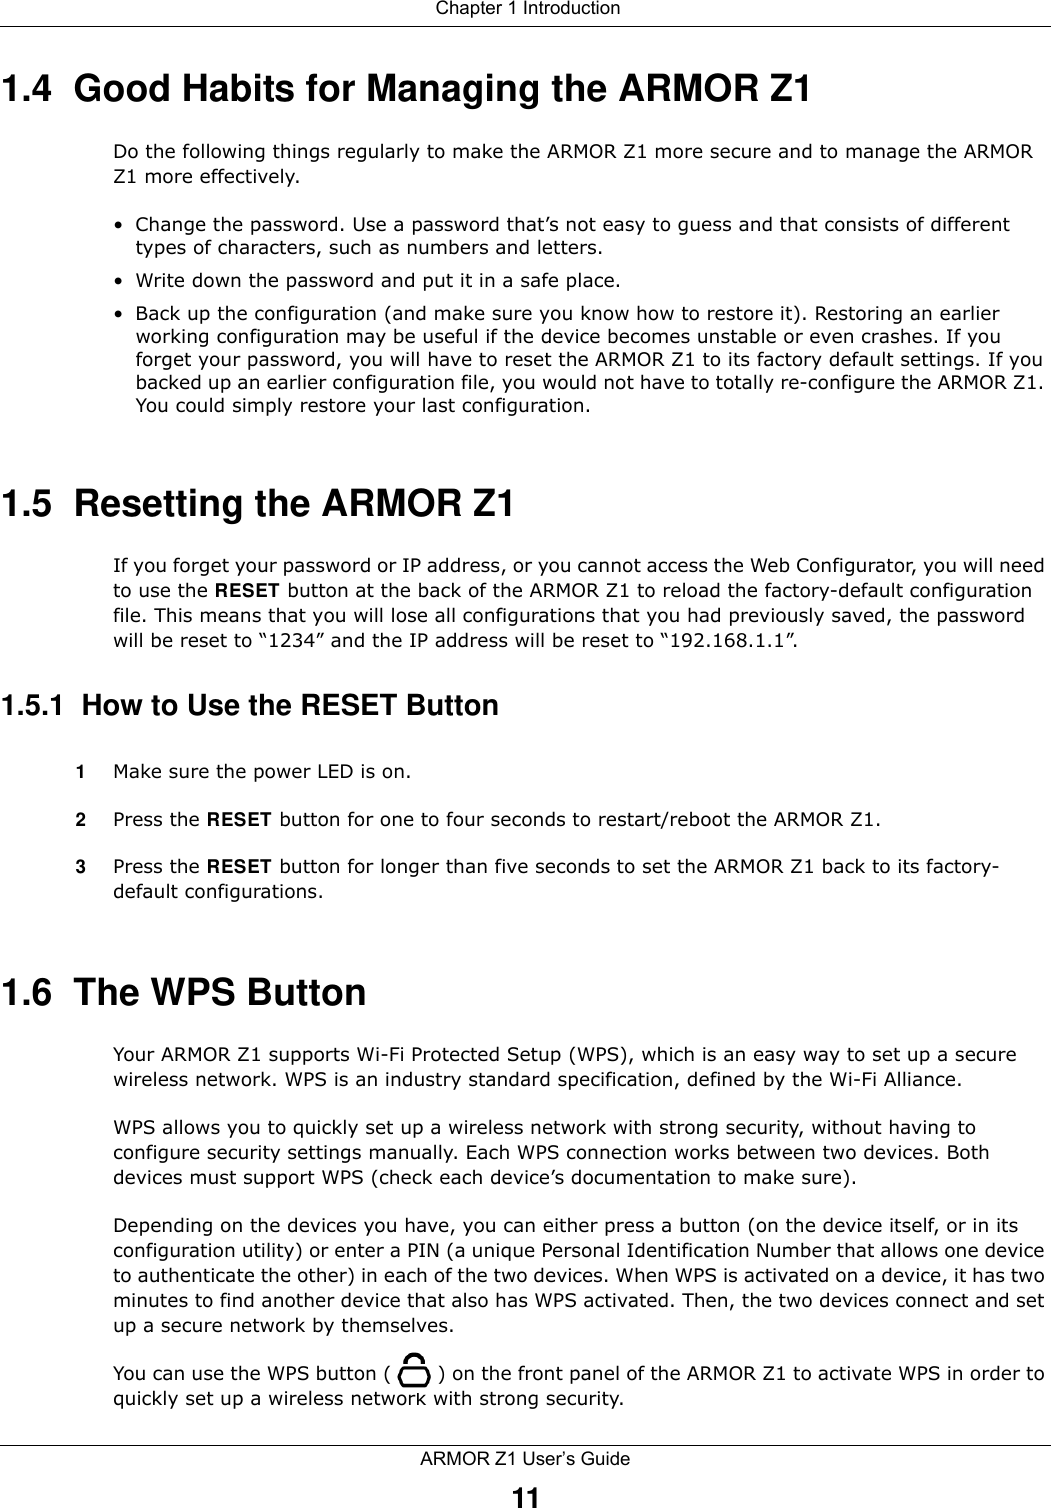  Chapter 1 IntroductionARMOR Z1 User’s Guide111.4  Good Habits for Managing the ARMOR Z1Do the following things regularly to make the ARMOR Z1 more secure and to manage the ARMOR Z1 more effectively.• Change the password. Use a password that’s not easy to guess and that consists of different types of characters, such as numbers and letters.• Write down the password and put it in a safe place.• Back up the configuration (and make sure you know how to restore it). Restoring an earlier working configuration may be useful if the device becomes unstable or even crashes. If you forget your password, you will have to reset the ARMOR Z1 to its factory default settings. If you backed up an earlier configuration file, you would not have to totally re-configure the ARMOR Z1. You could simply restore your last configuration.1.5  Resetting the ARMOR Z1If you forget your password or IP address, or you cannot access the Web Configurator, you will need to use the RESET button at the back of the ARMOR Z1 to reload the factory-default configuration file. This means that you will lose all configurations that you had previously saved, the password will be reset to “1234” and the IP address will be reset to “192.168.1.1”.1.5.1  How to Use the RESET Button1Make sure the power LED is on.2Press the RESET button for one to four seconds to restart/reboot the ARMOR Z1.3Press the RESET button for longer than five seconds to set the ARMOR Z1 back to its factory-default configurations.1.6  The WPS ButtonYour ARMOR Z1 supports Wi-Fi Protected Setup (WPS), which is an easy way to set up a secure wireless network. WPS is an industry standard specification, defined by the Wi-Fi Alliance.WPS allows you to quickly set up a wireless network with strong security, without having to configure security settings manually. Each WPS connection works between two devices. Both devices must support WPS (check each device’s documentation to make sure). Depending on the devices you have, you can either press a button (on the device itself, or in its configuration utility) or enter a PIN (a unique Personal Identification Number that allows one device to authenticate the other) in each of the two devices. When WPS is activated on a device, it has two minutes to find another device that also has WPS activated. Then, the two devices connect and set up a secure network by themselves.You can use the WPS button ( ) on the front panel of the ARMOR Z1 to activate WPS in order to quickly set up a wireless network with strong security.